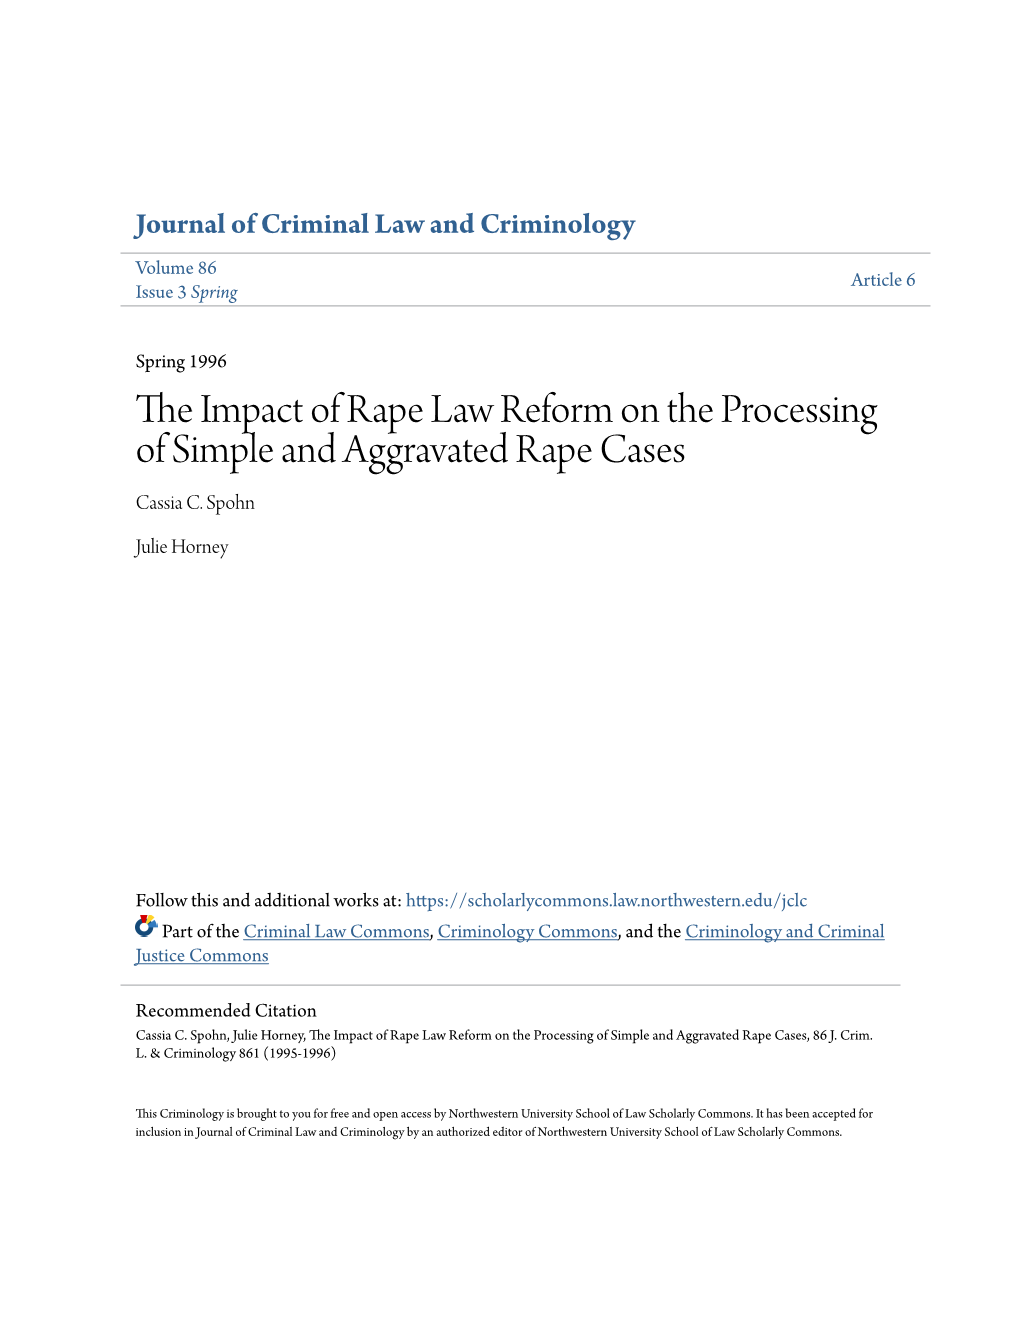 The Impact of Rape Law Reform on the Processing of Simple and Aggravated Rape Cases